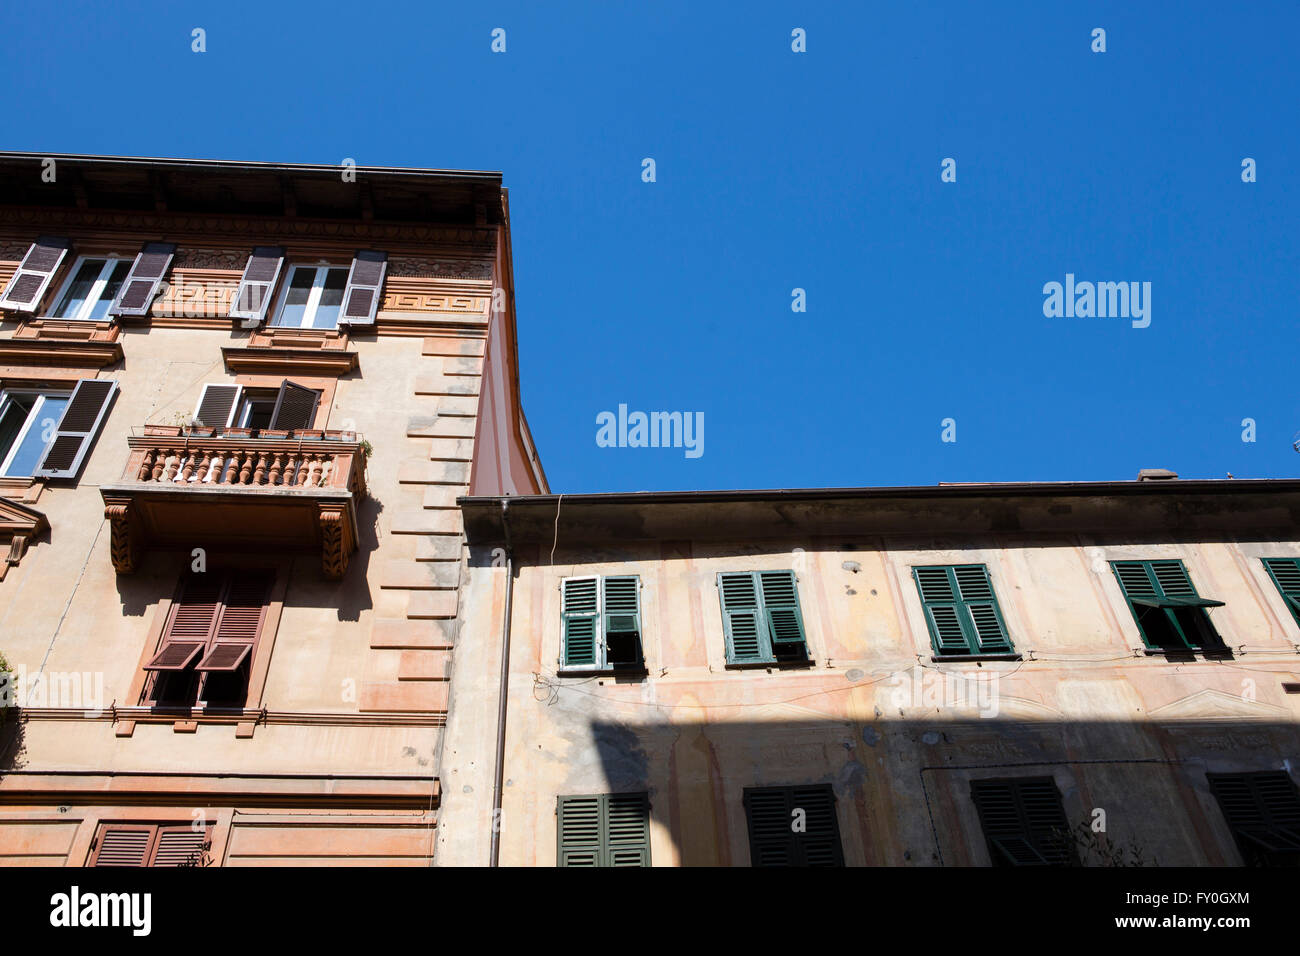 Painted frontages of Italian town houses in a tromp l'oiel style with blue sky Stock Photo